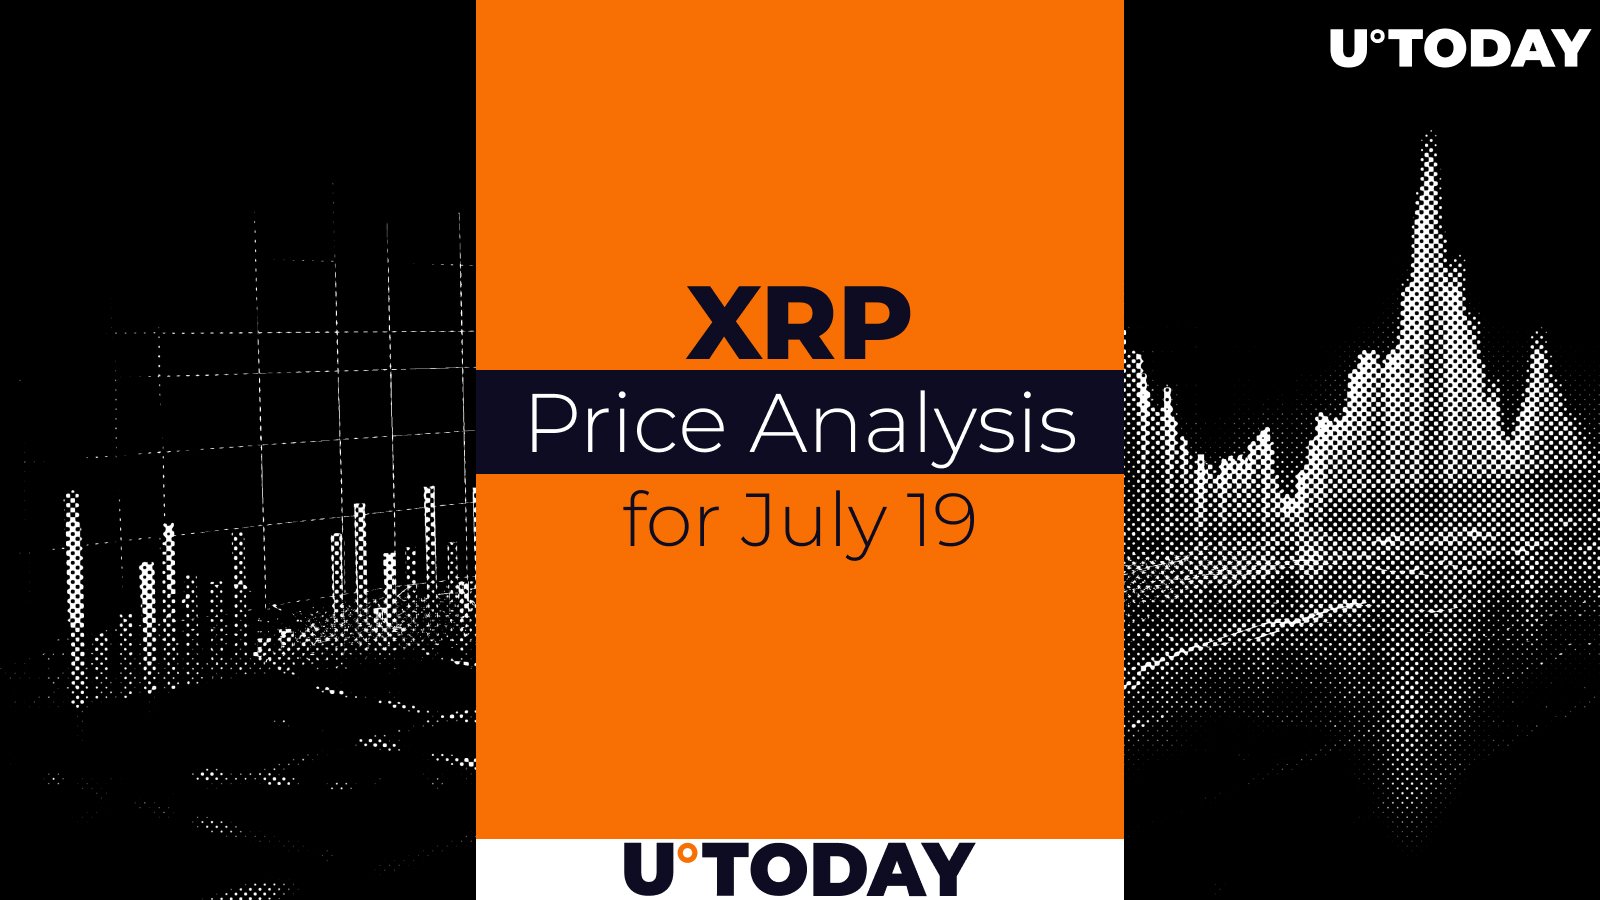 XRP Price Prediction for July 19